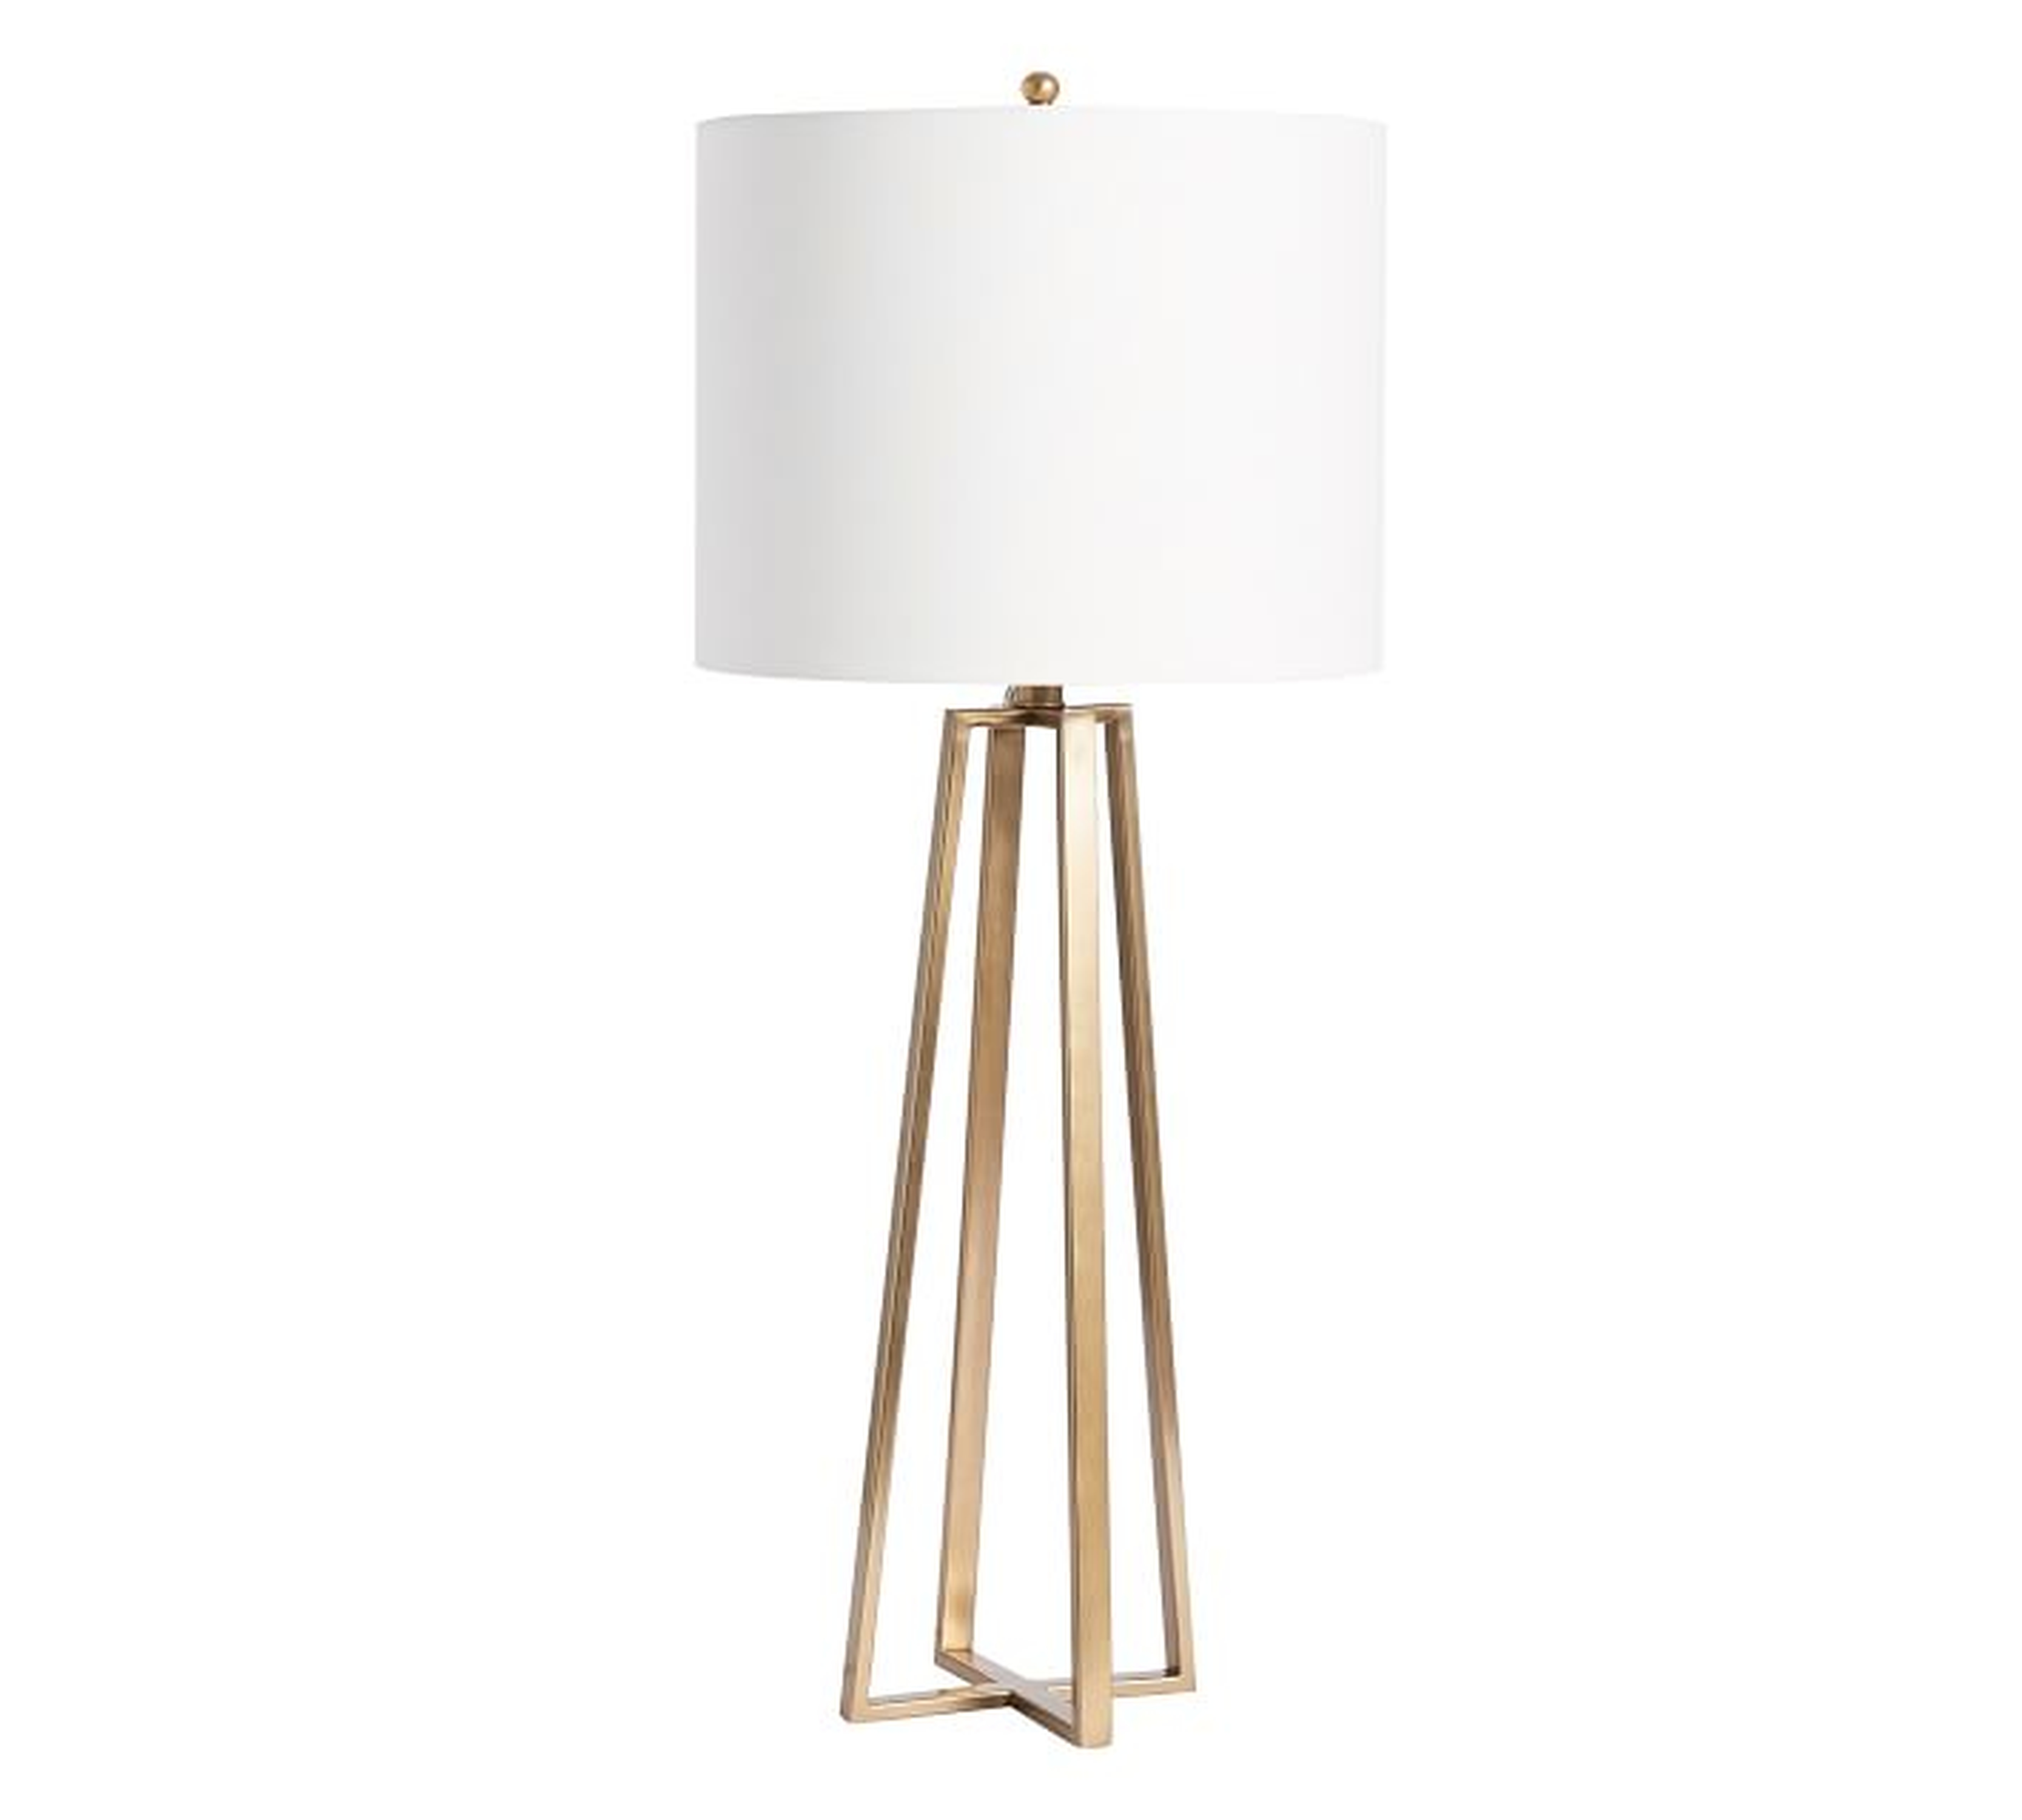 Carter Table Lamp, Champagne Brass with Ivory Shade - Pottery Barn